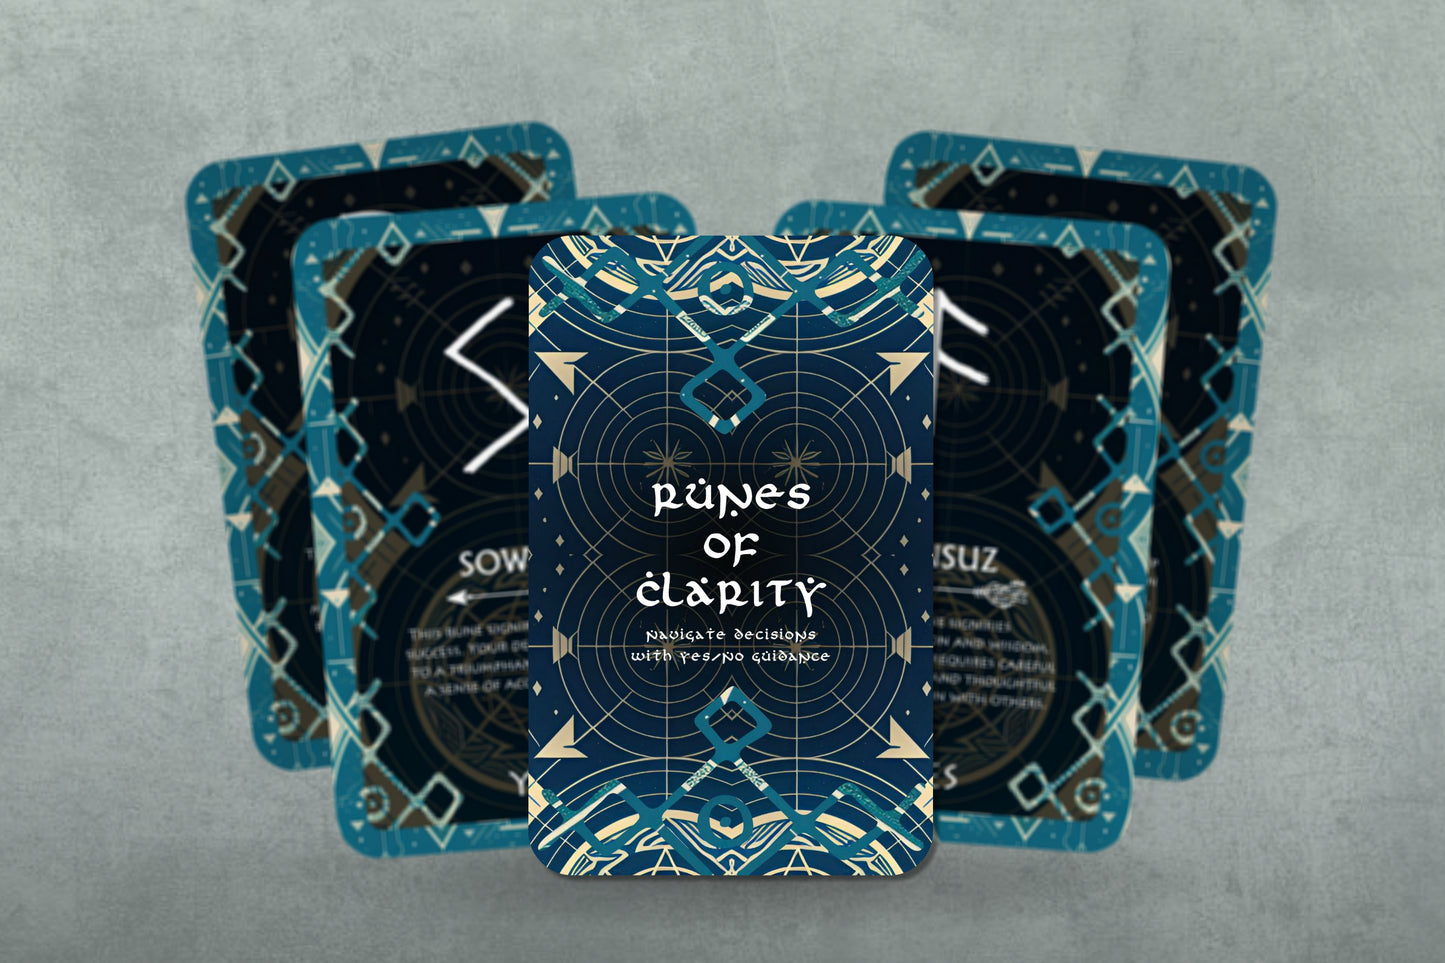 Runes of Clarity - Navigate decisions with Yes / No Guidance